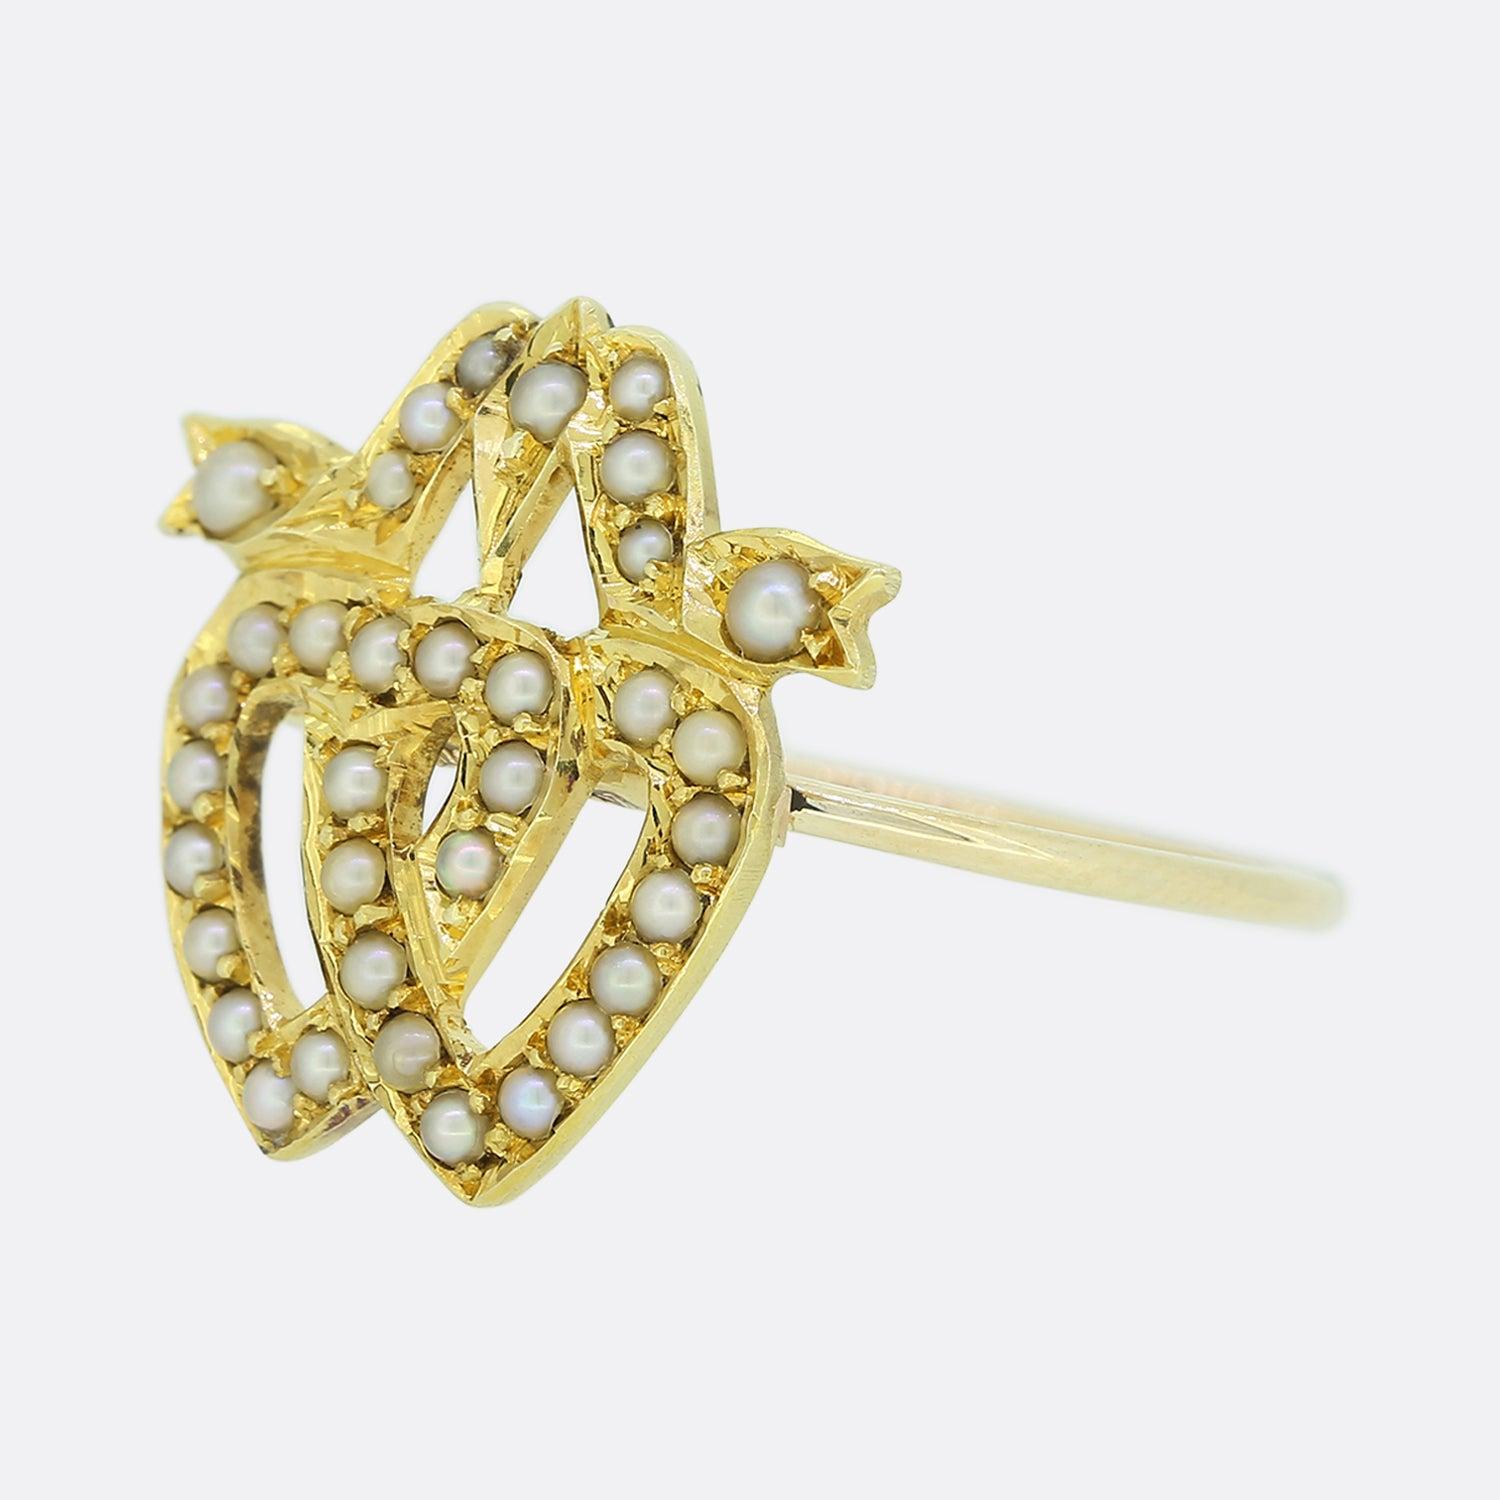 This is a lovely antique double heart ring. The ring features two interlocking hearts which have been set natural seed pearls and crafted in 15ct yellow gold with a plain band. This ring started life as an antique Victorian brooch but has been